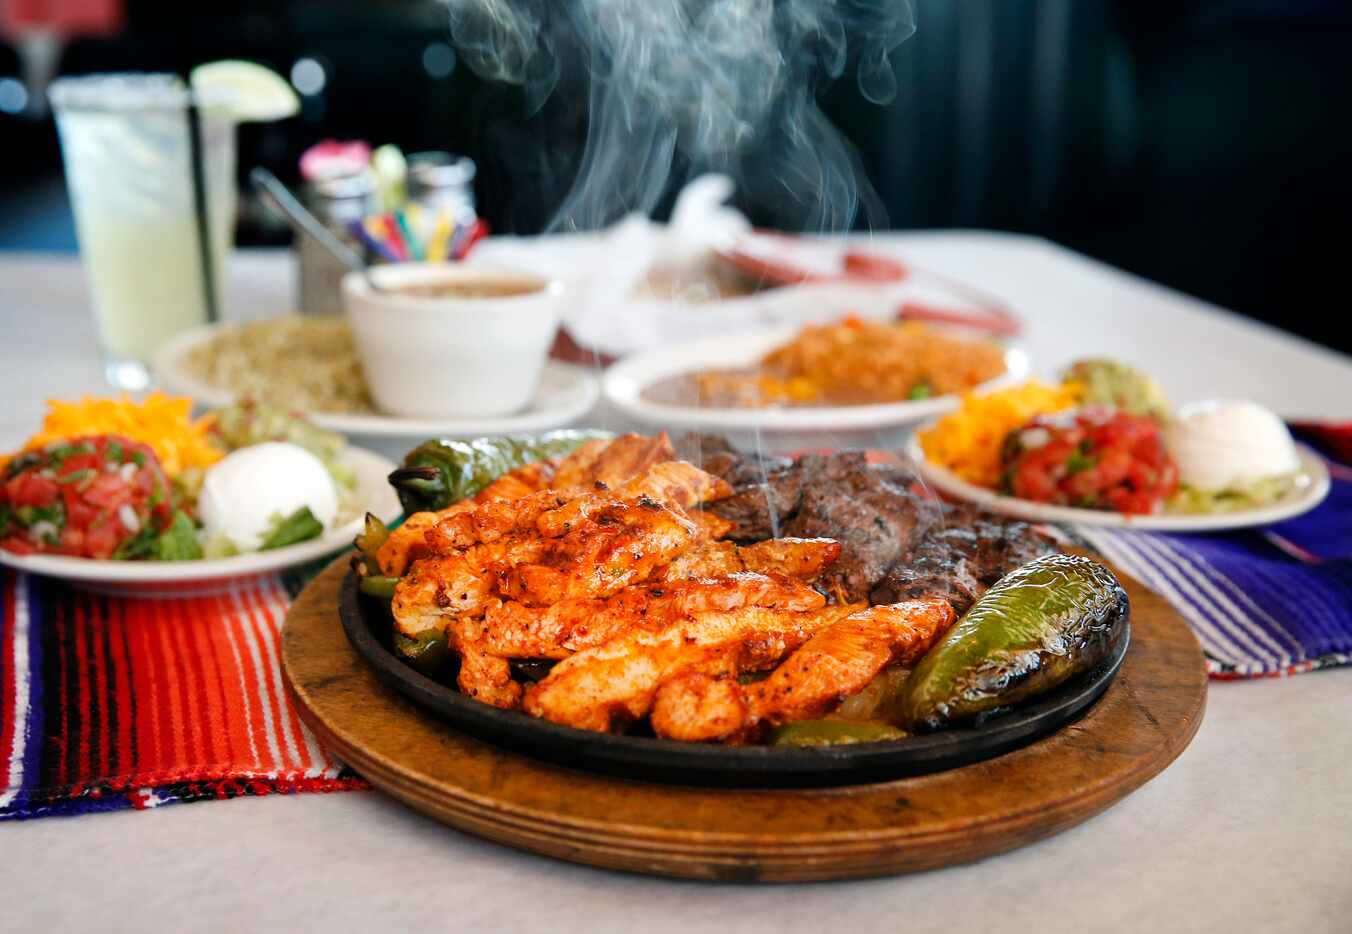 The two-person fajitas plate of chicken and beef with all the fixings is served at El...